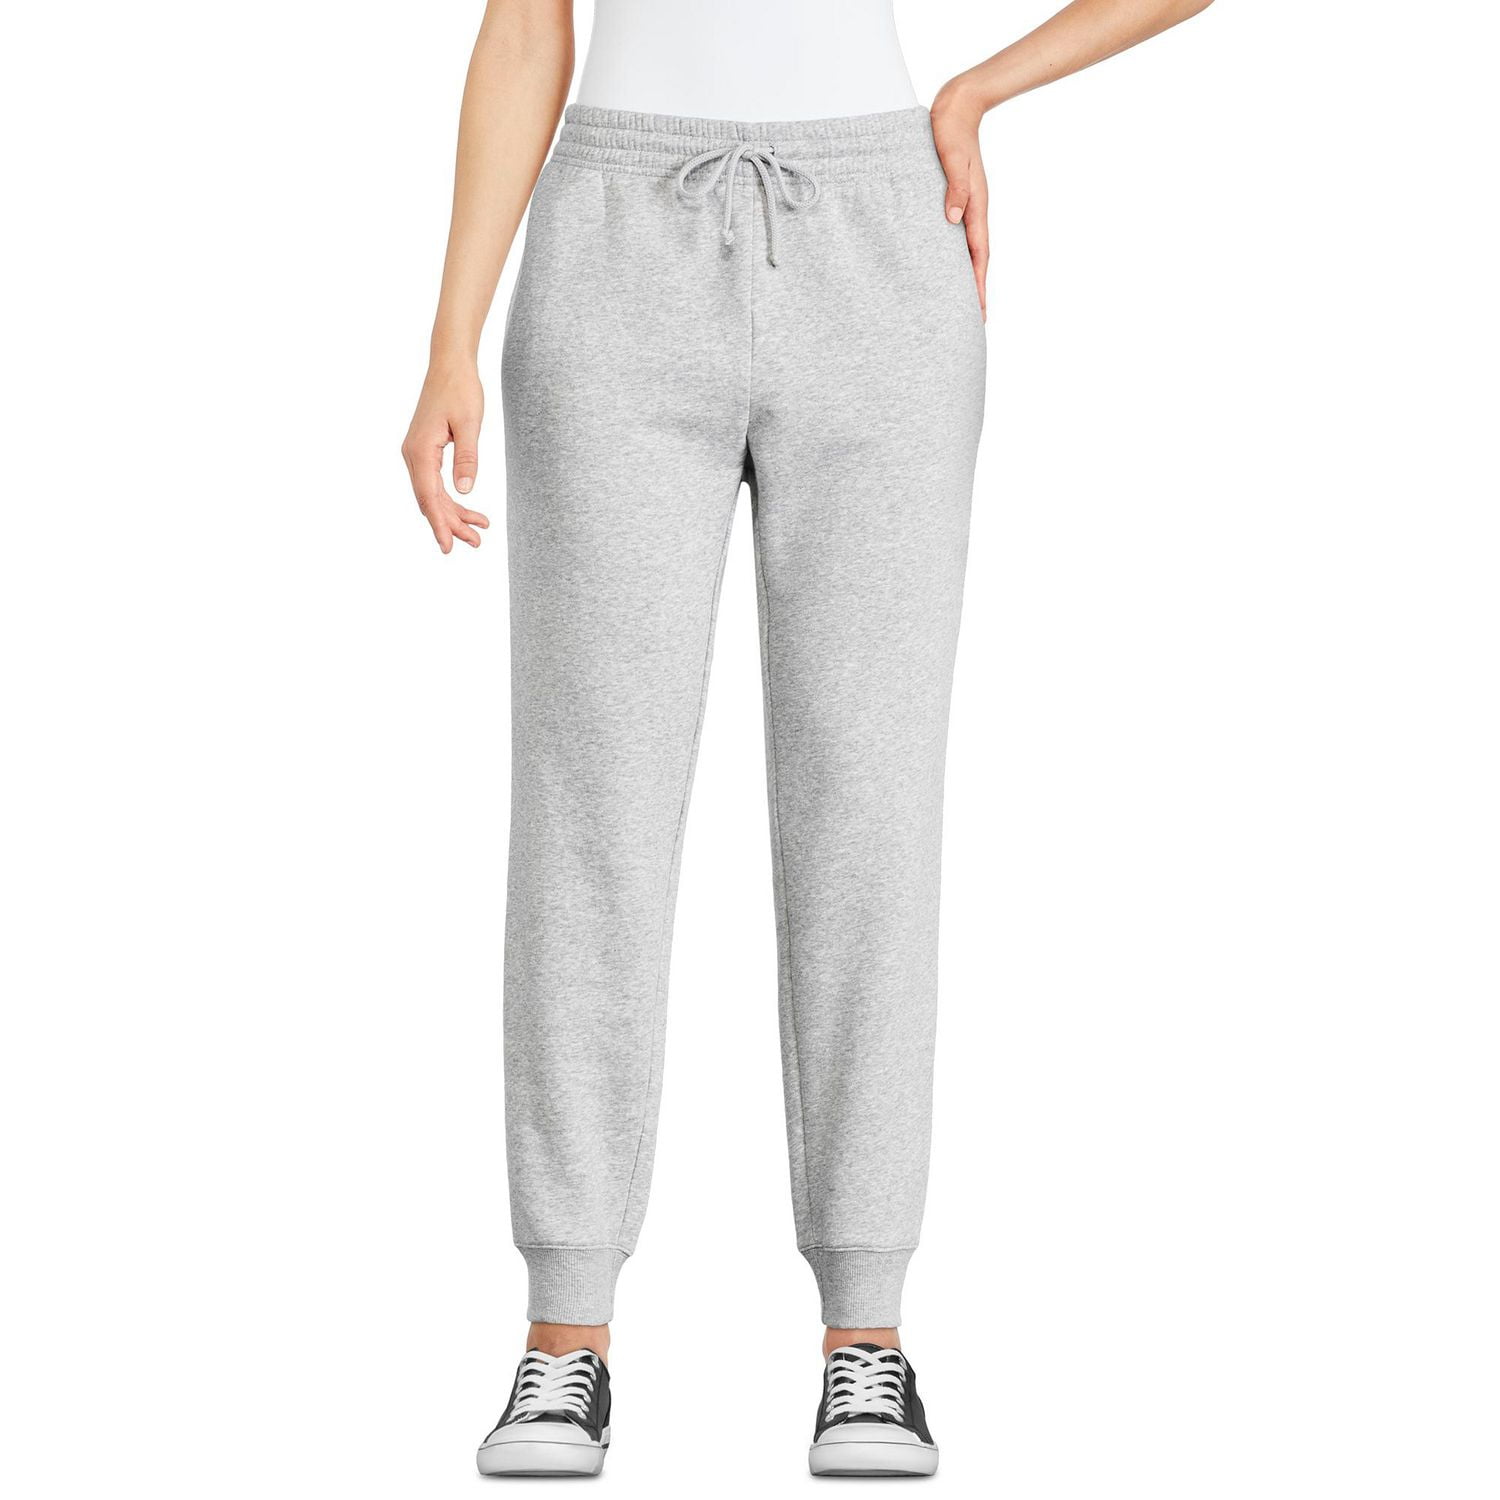 Versatile and Stylish Joggers on Sale!